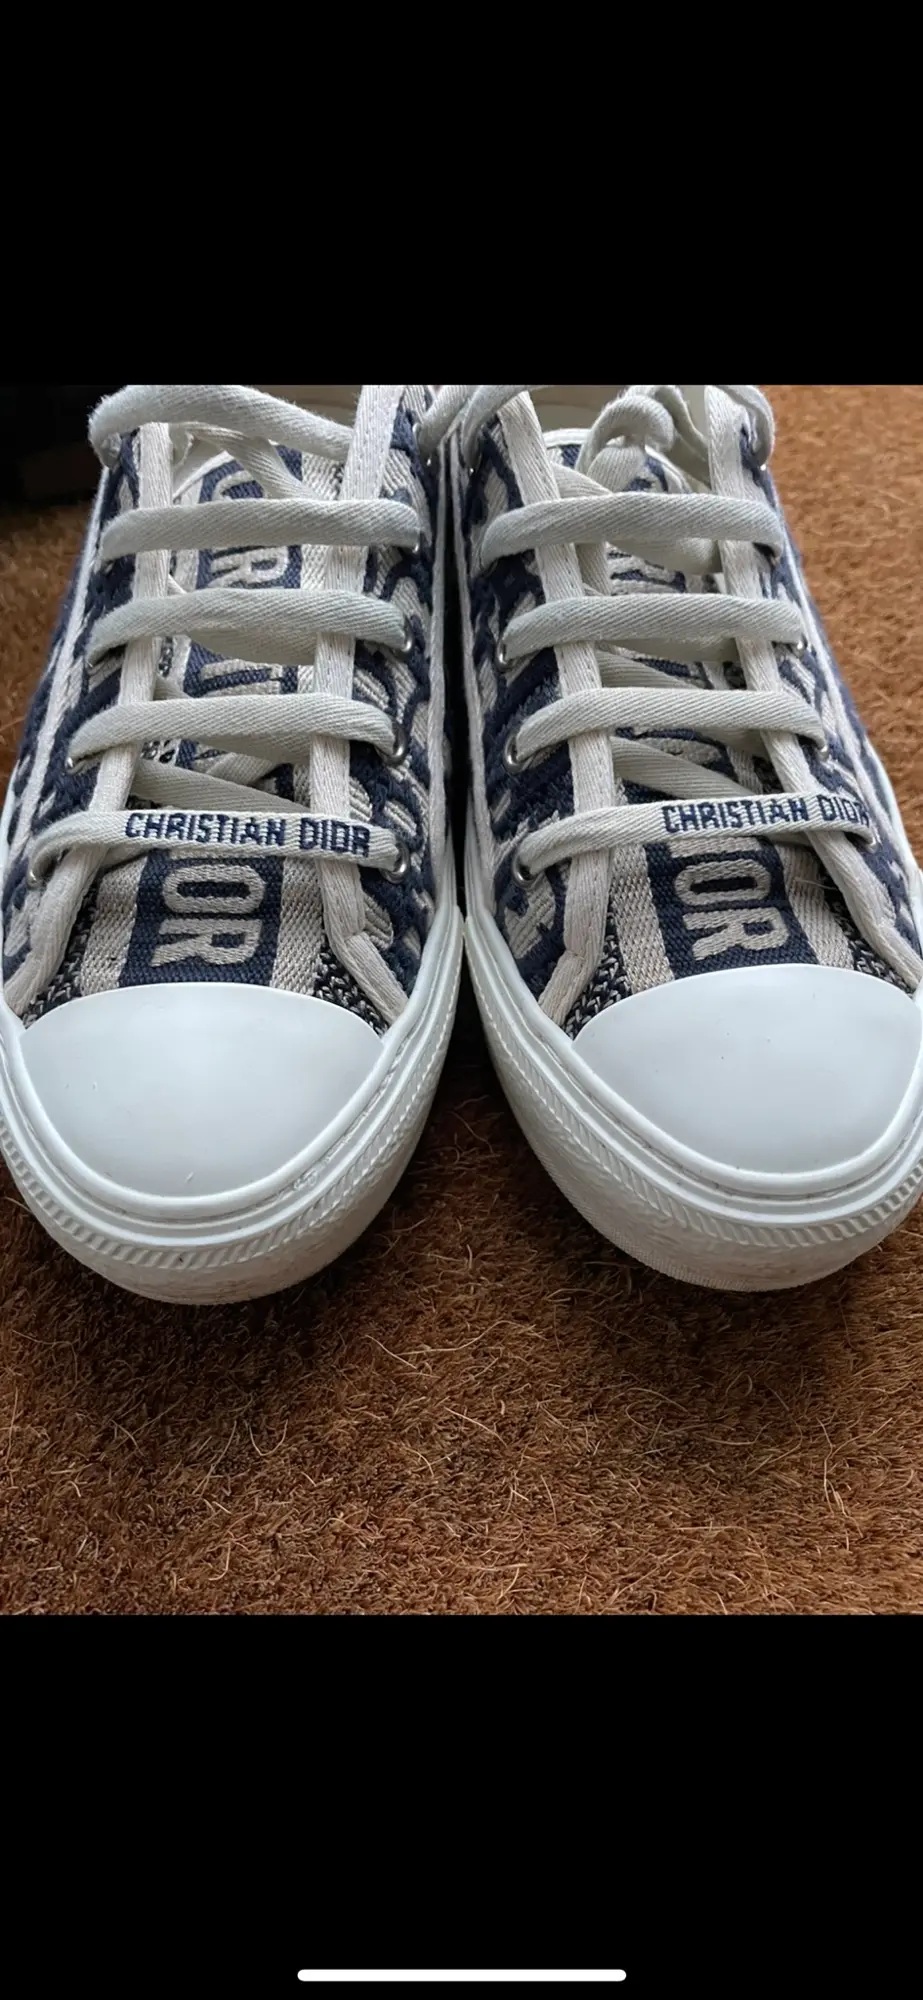 Christian Dior sneakers